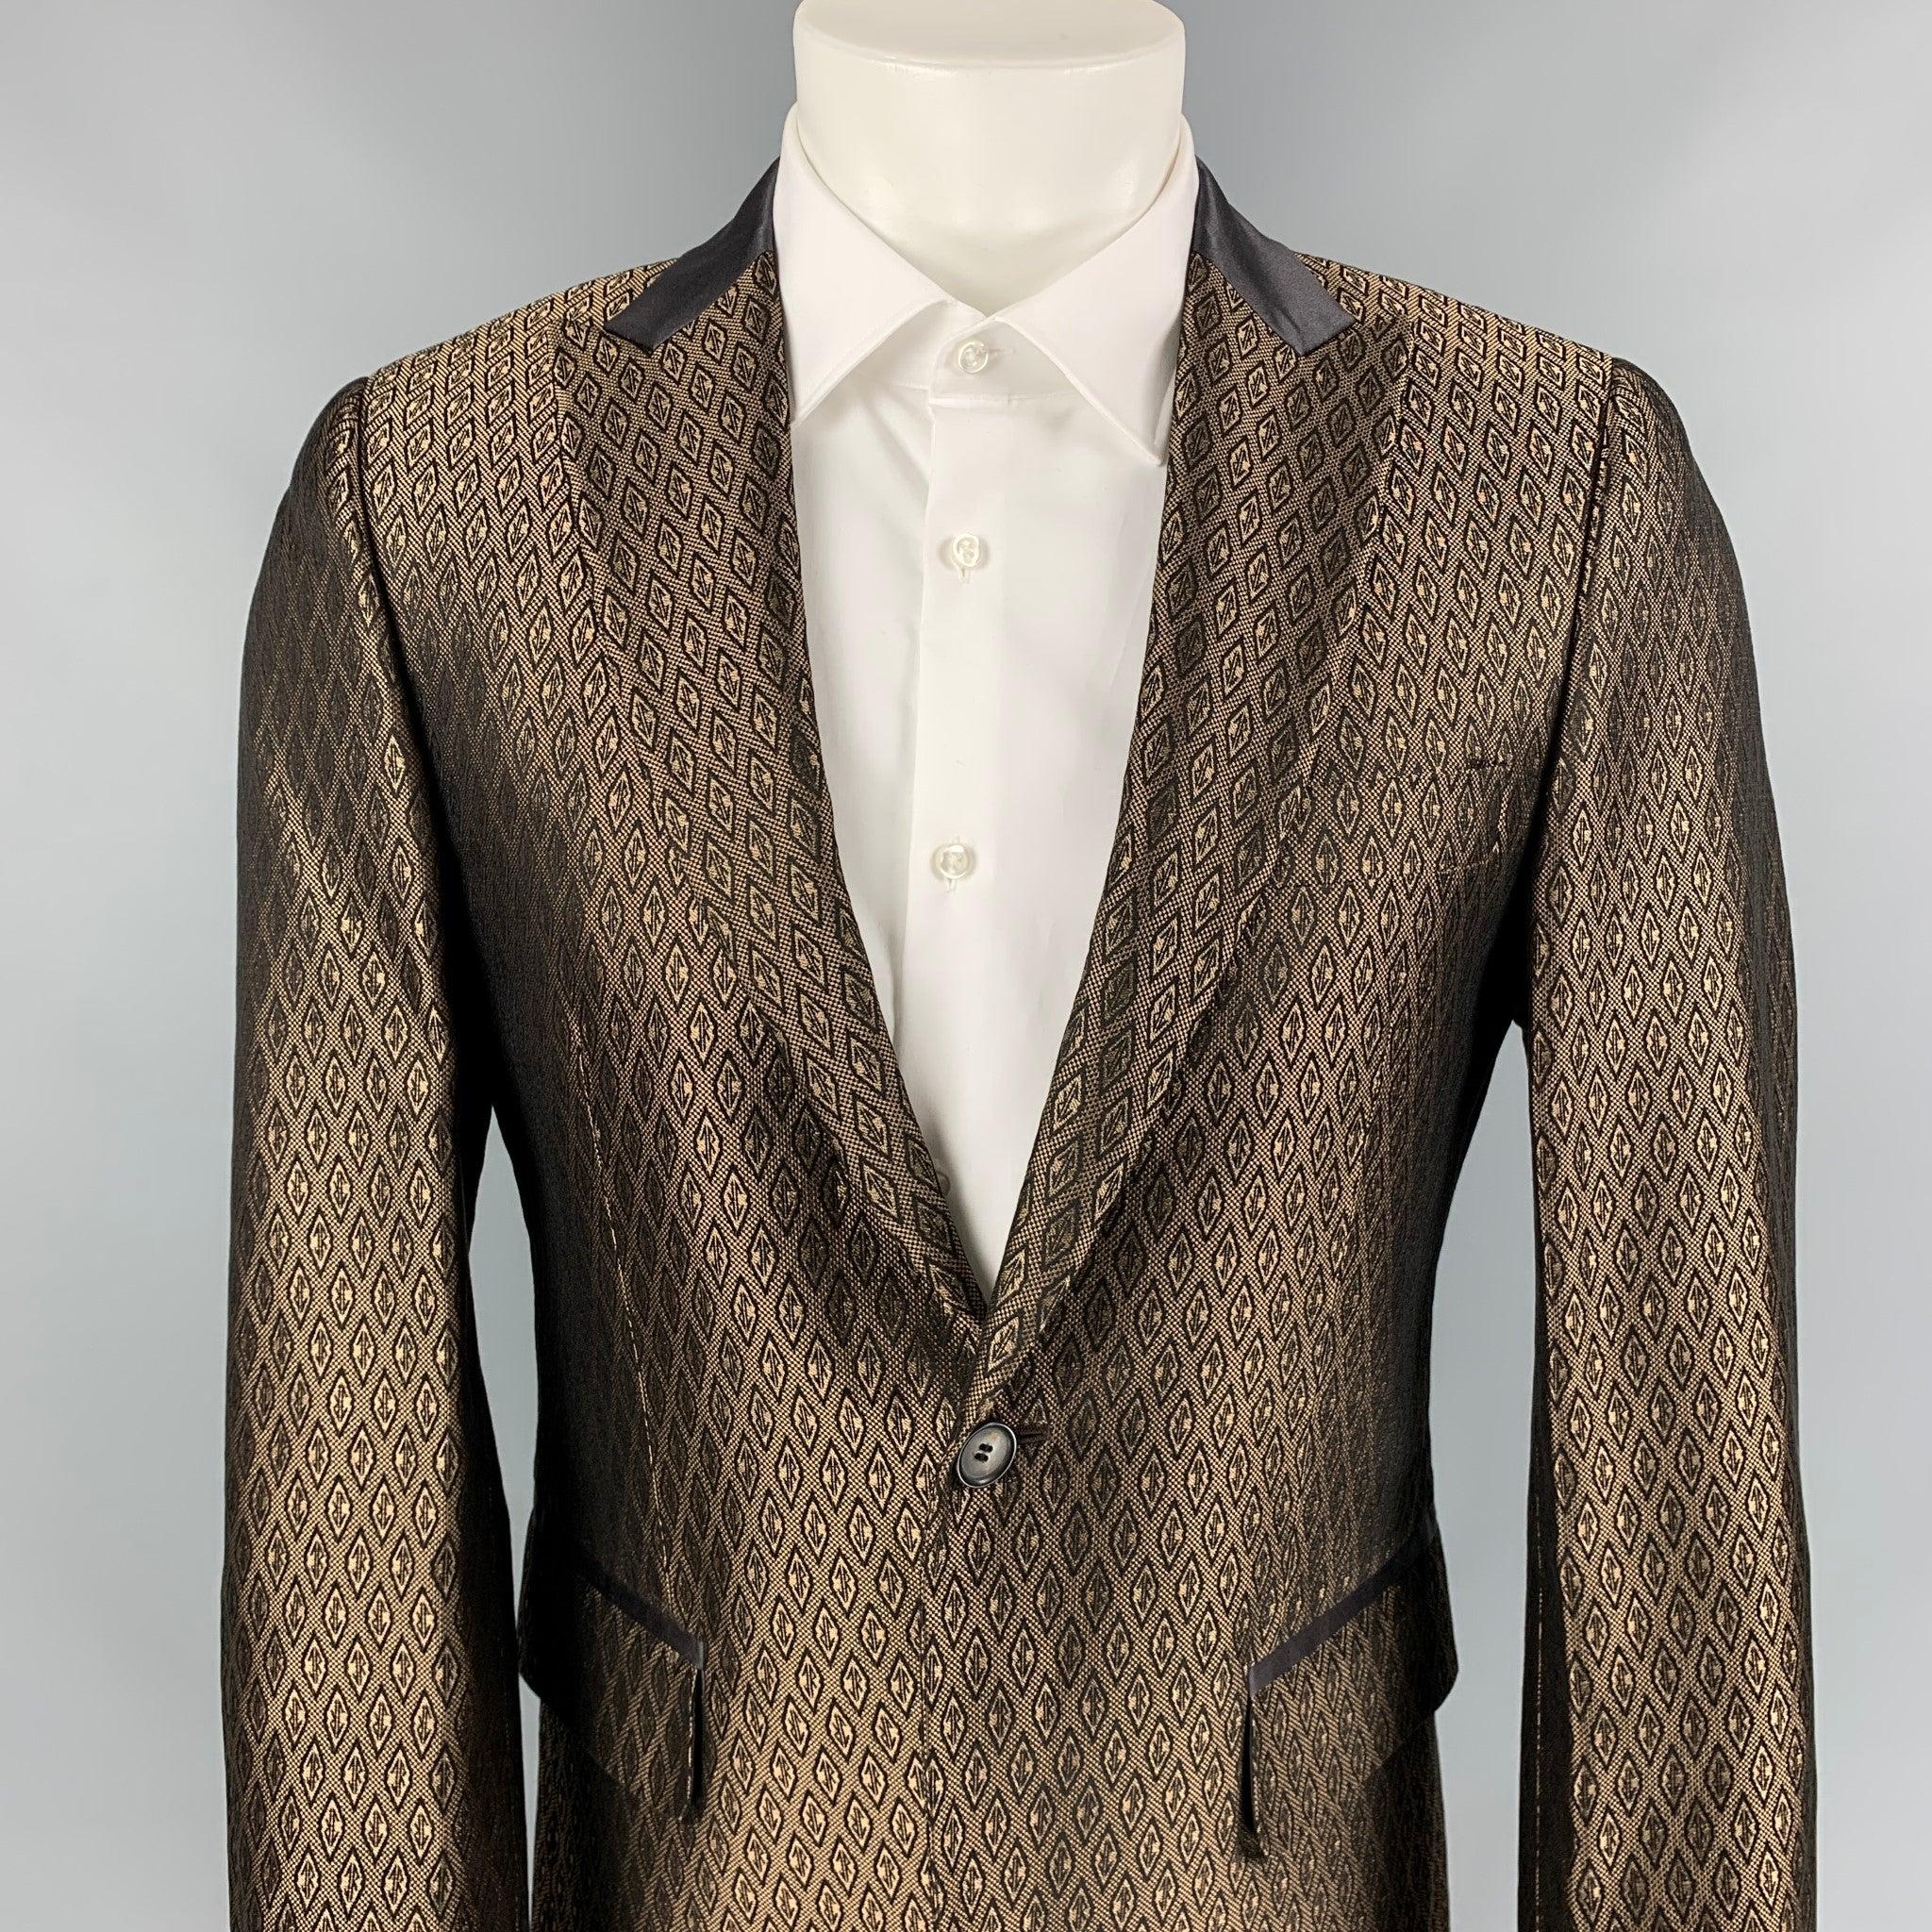 JOHN RICHMOND sport coat comes in a brown jacquard cotton / silk with a full liner featuring a peak lapel, single back vent, flap pockets, and a single button closure. Made in Italy.
Very Good
Pre-Owned Condition. 

Marked:   Size tag removed. 